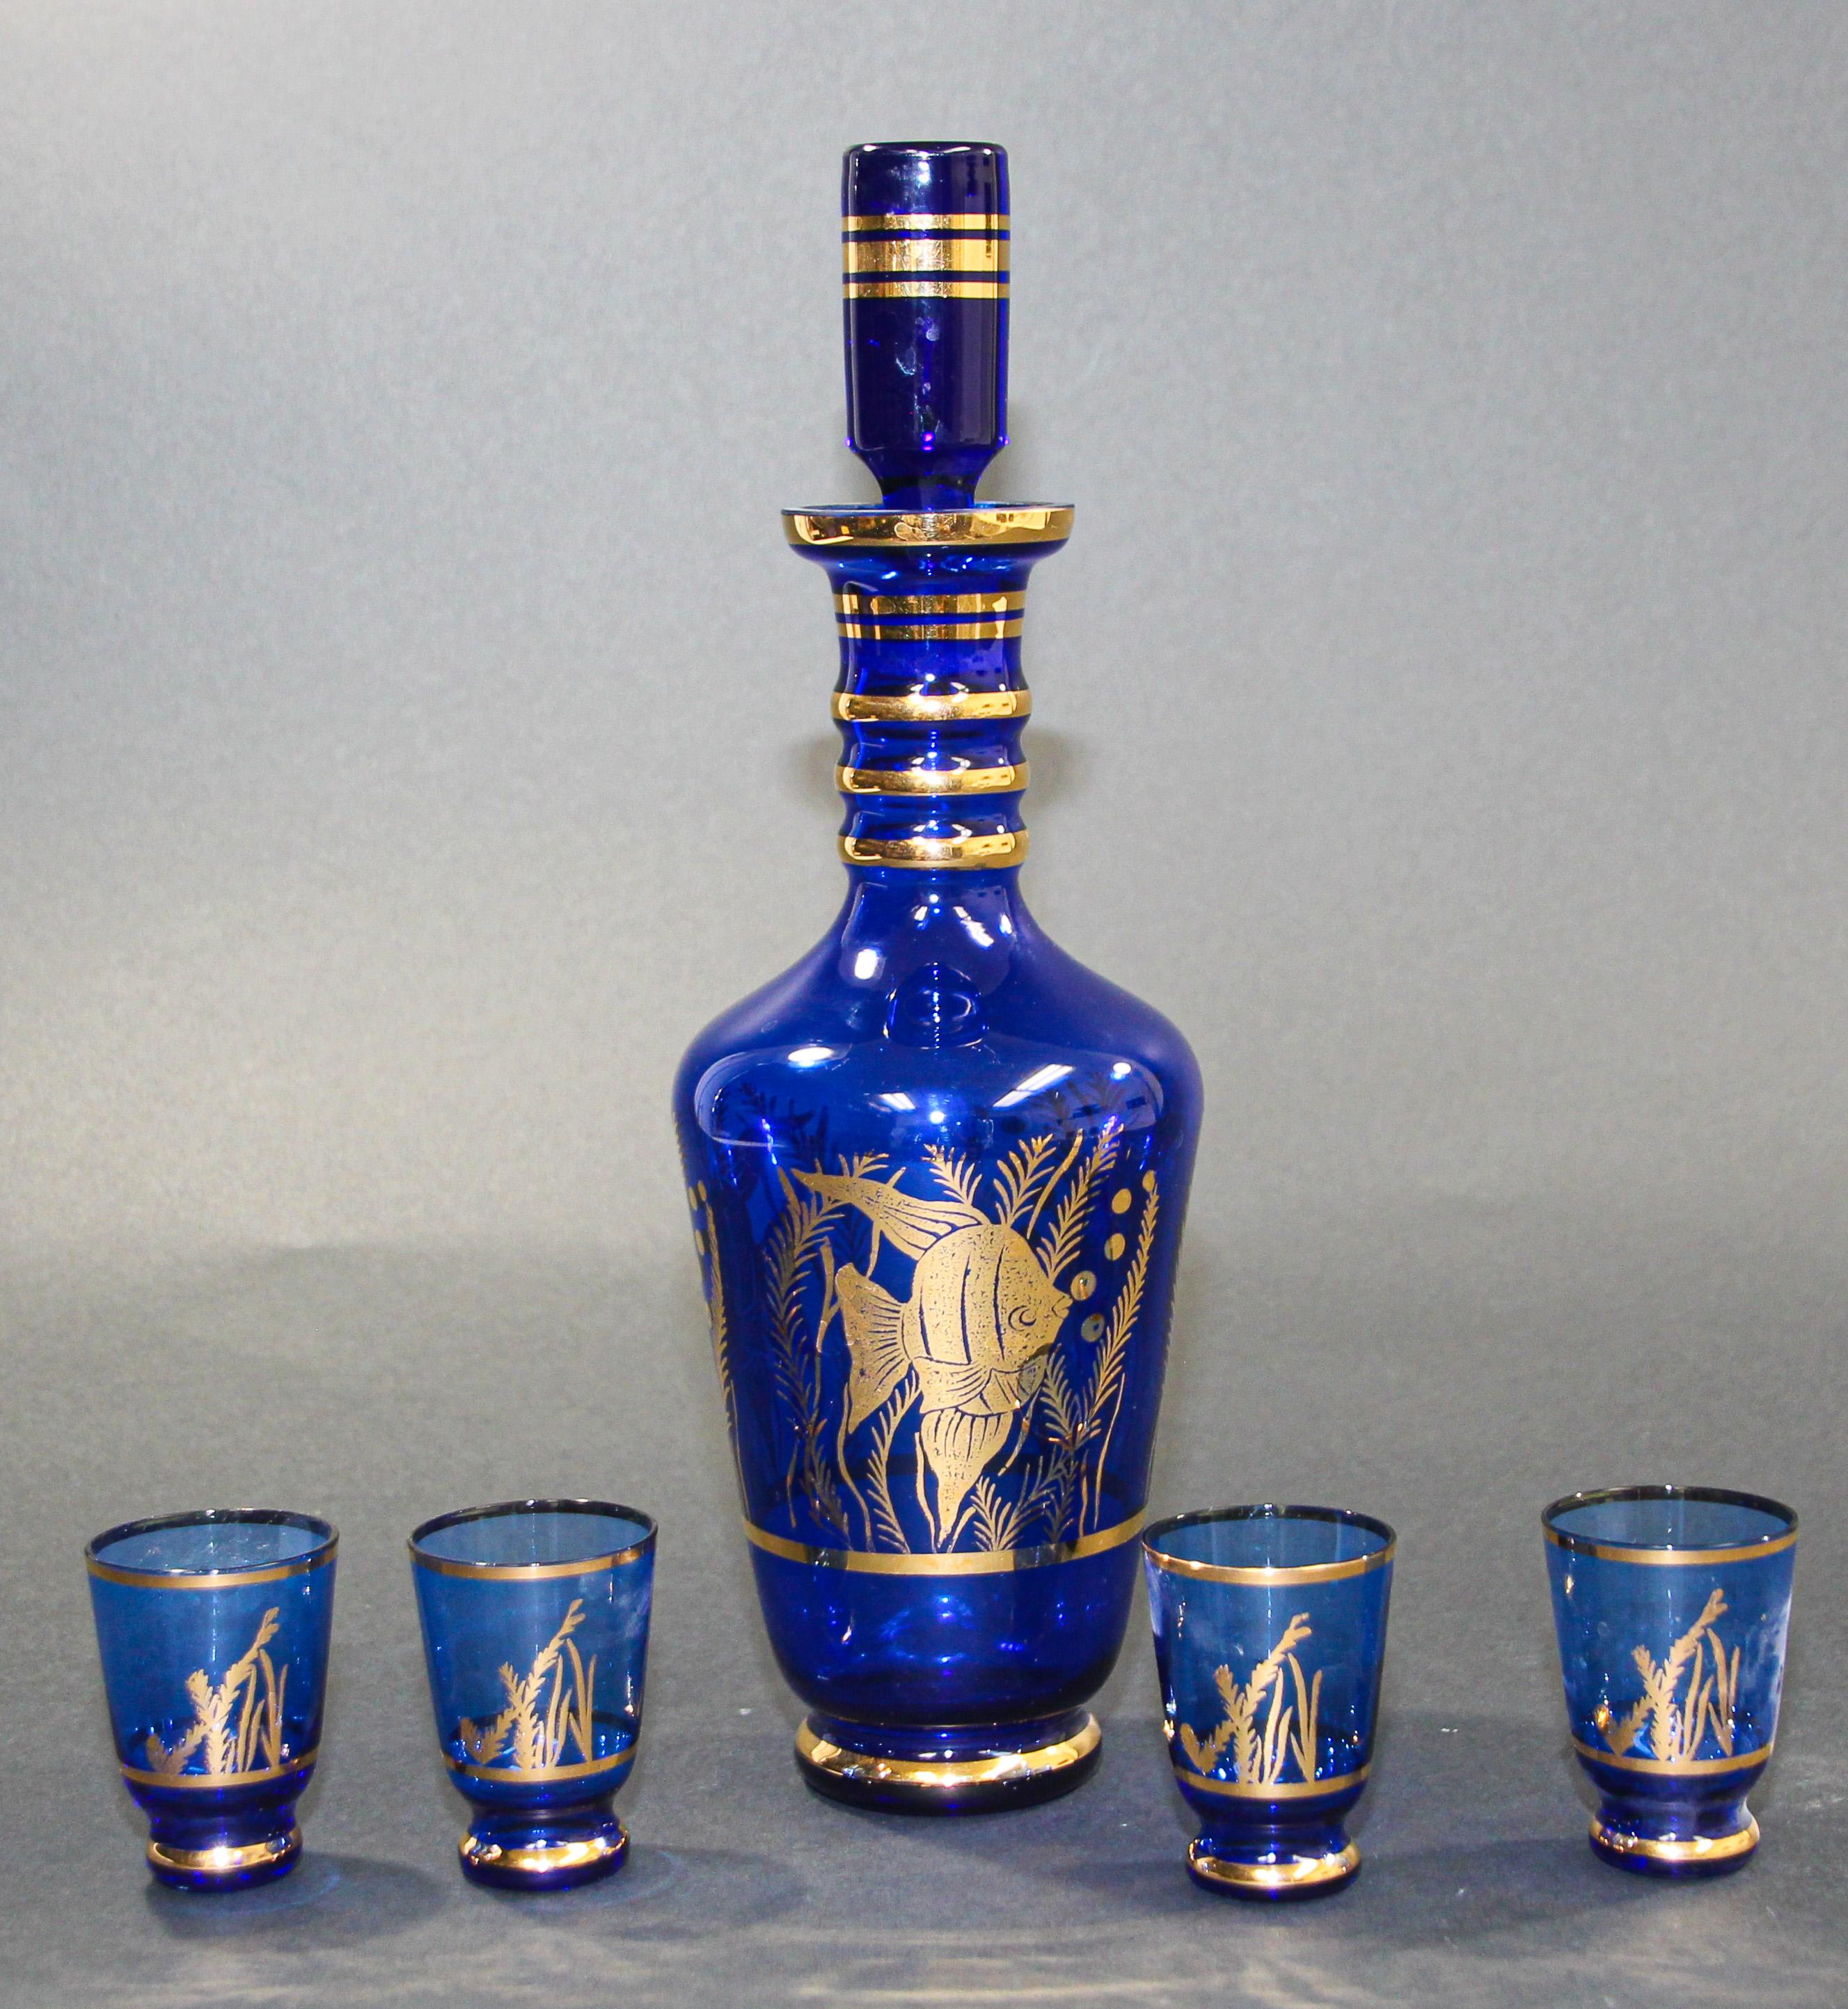 Cobalt blue enameled glass liquor set or aperitif service of five pieces, comprised of a decanter and four shot glasses.
Mouth blown glass in a stunning electric cobalt blue color enhanced with hand-painted enamel.
Measures: 12